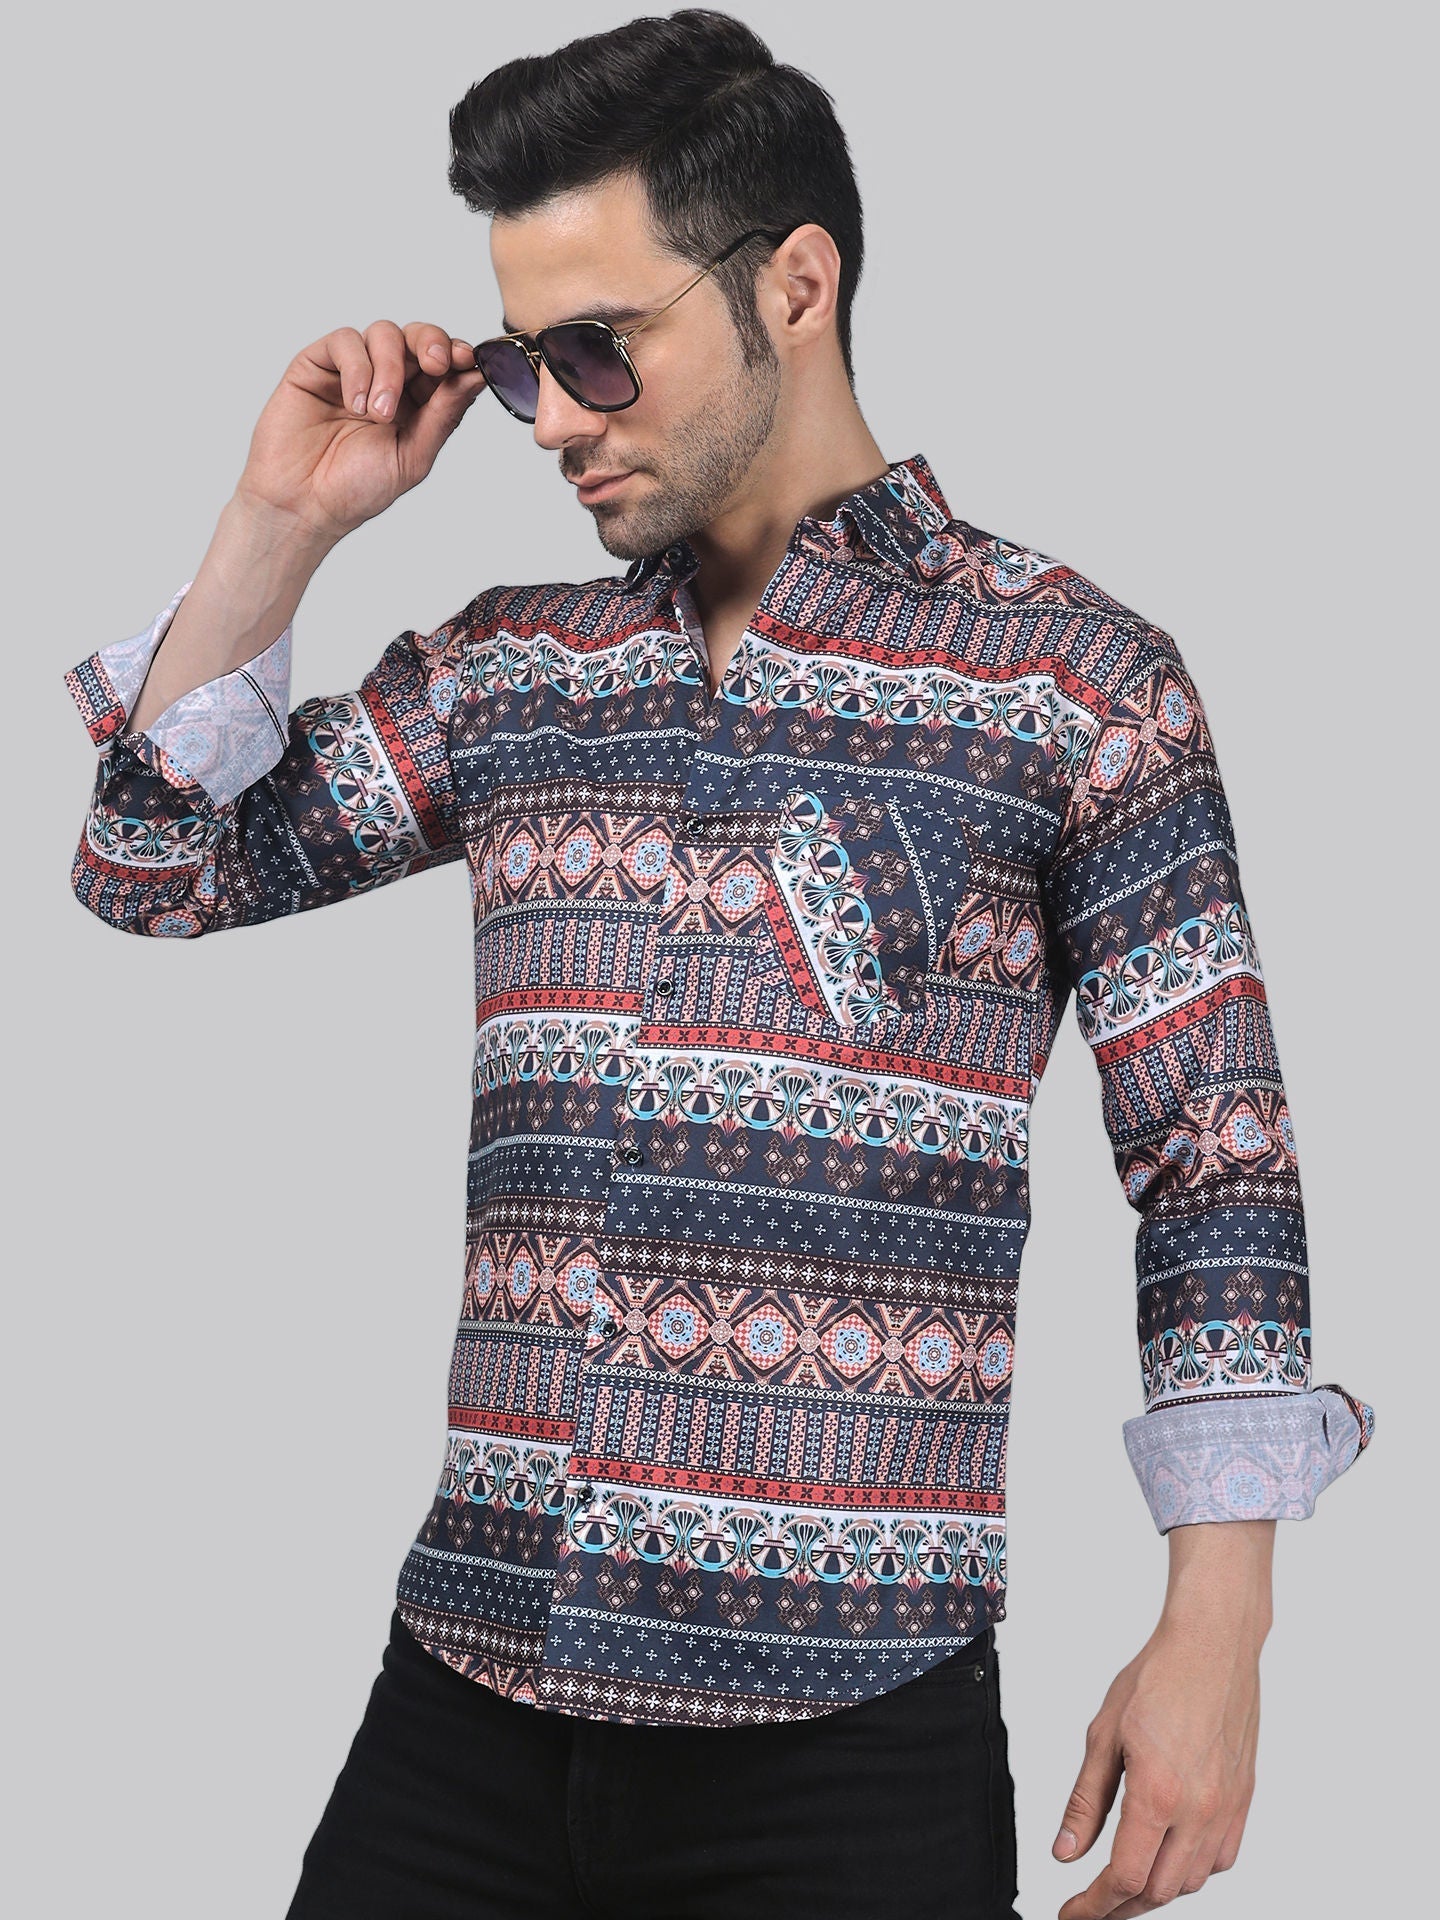 TryBuy Men's Trendy Party-wear Linen Casual Printed Full Sleeves Shirt - TryBuy® USA🇺🇸